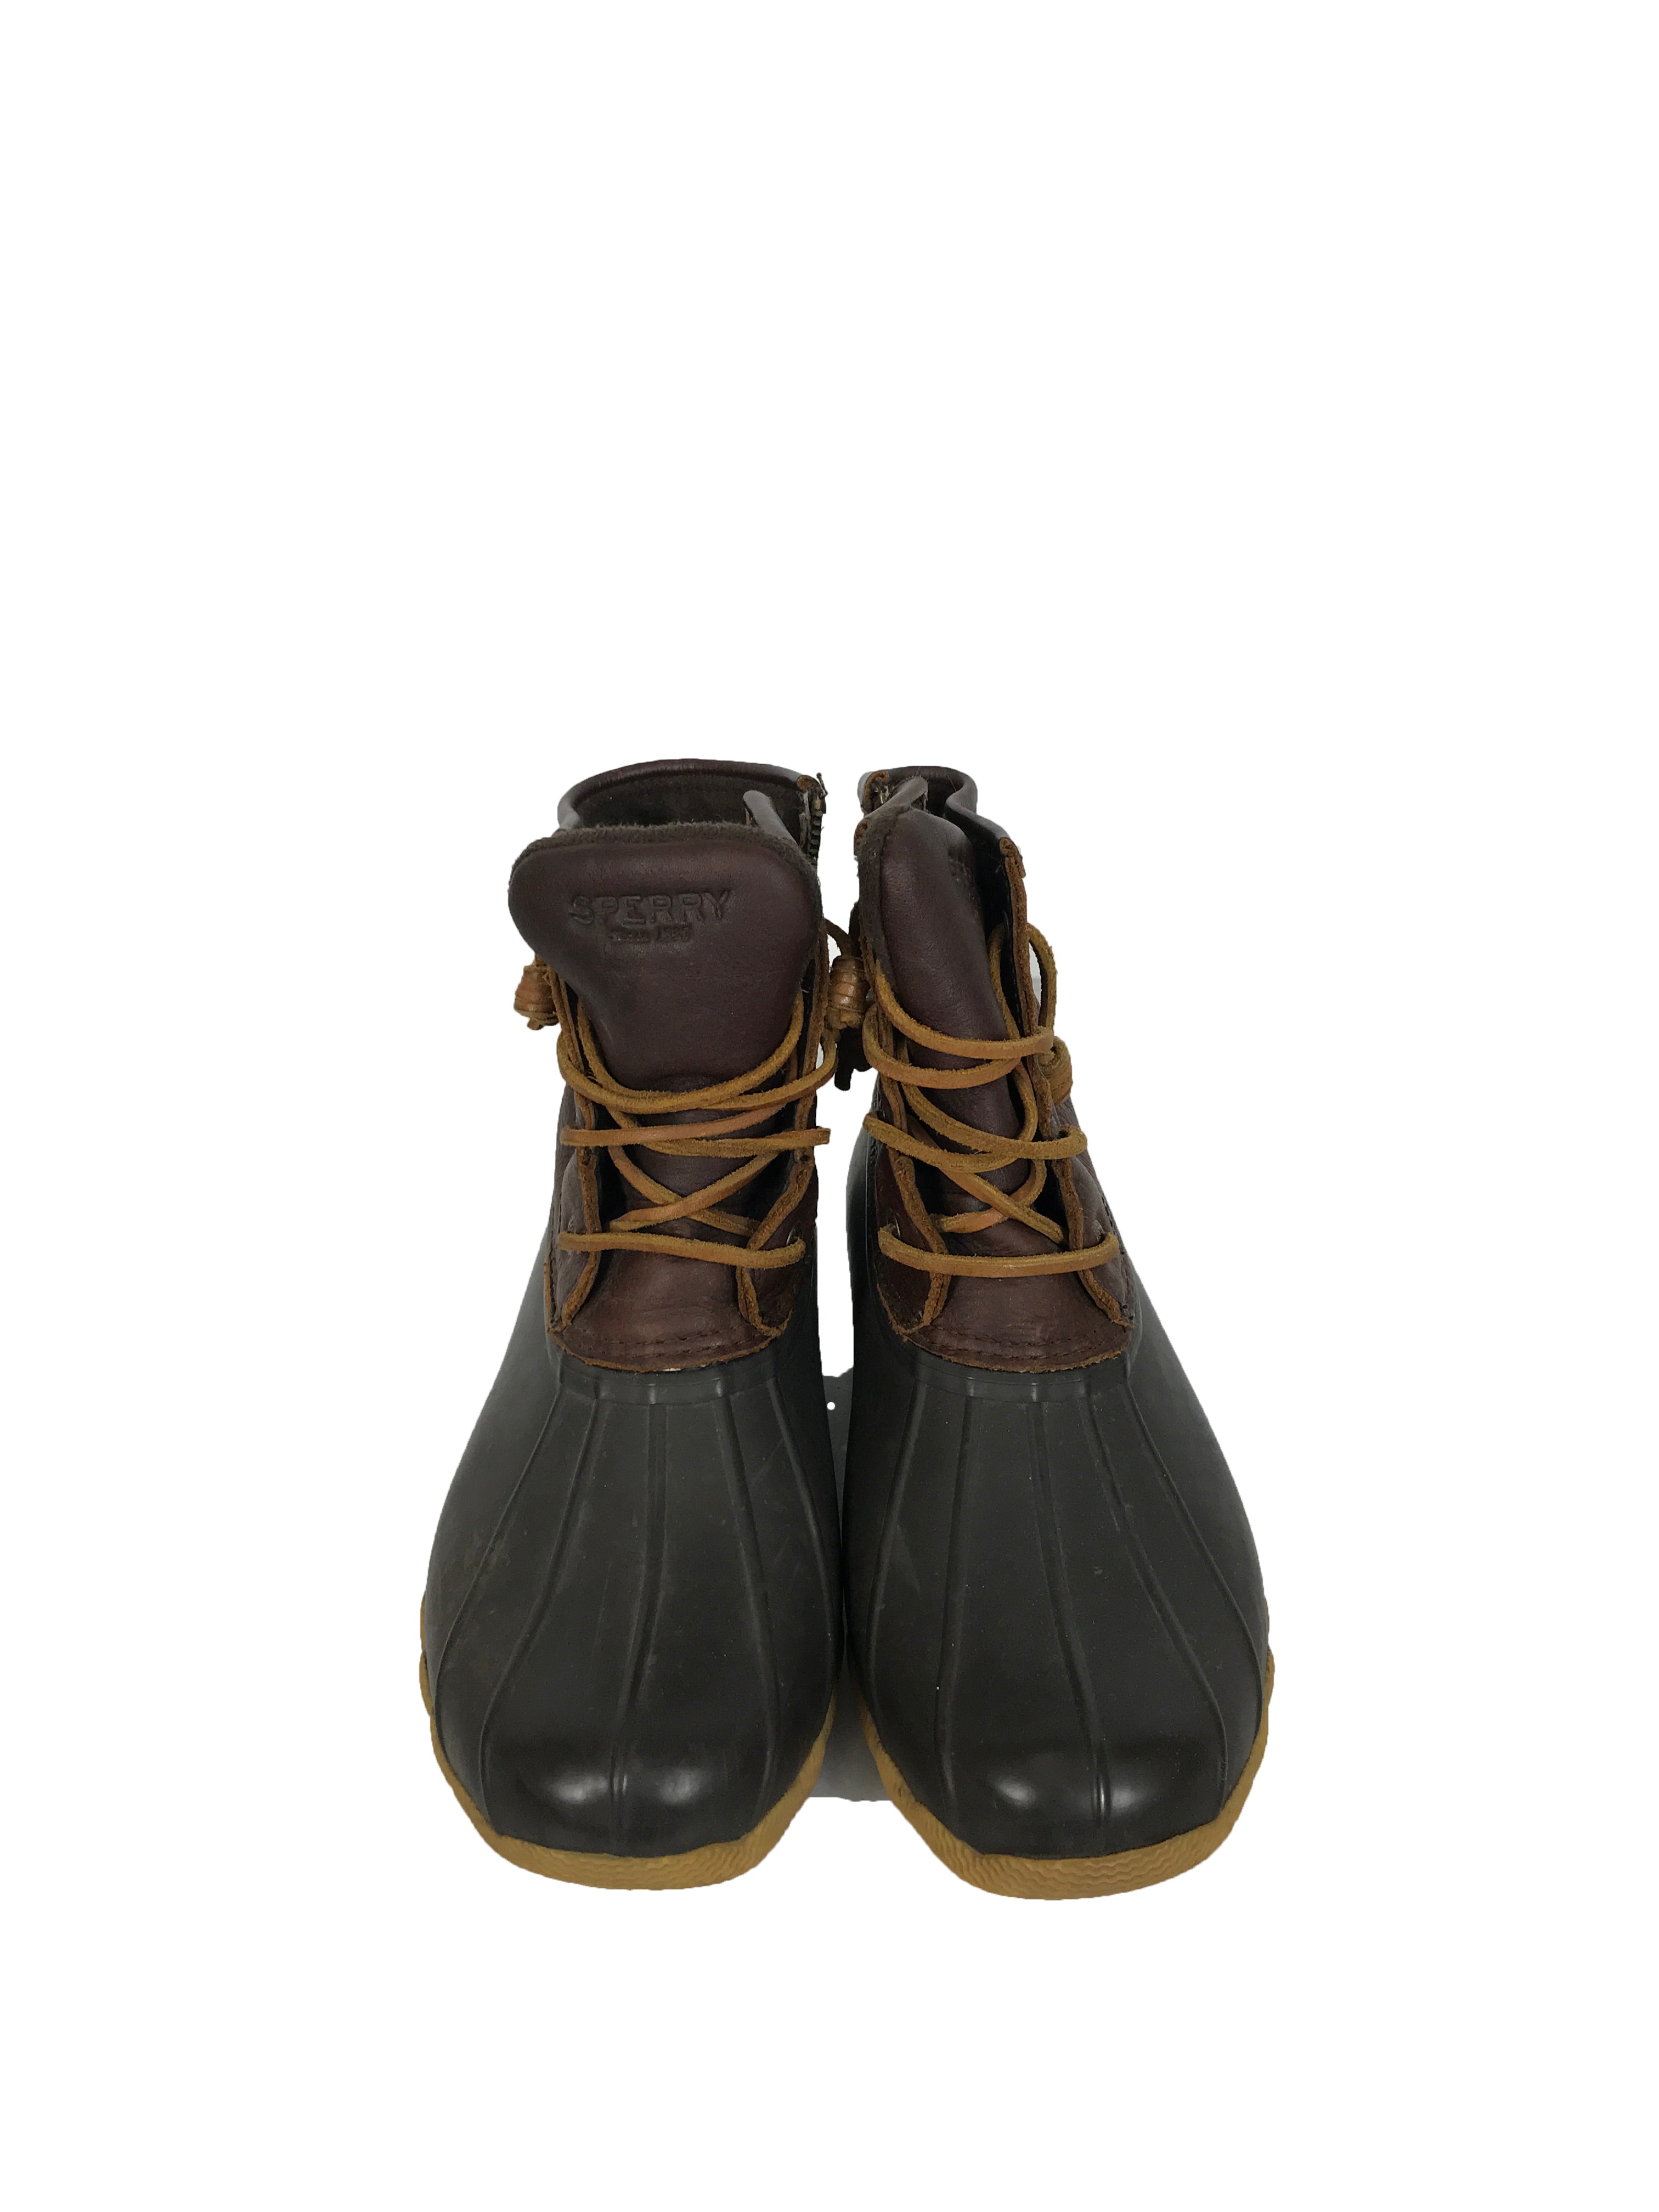 Sperry Saltwater Winter Lux Boots Women's Size 8